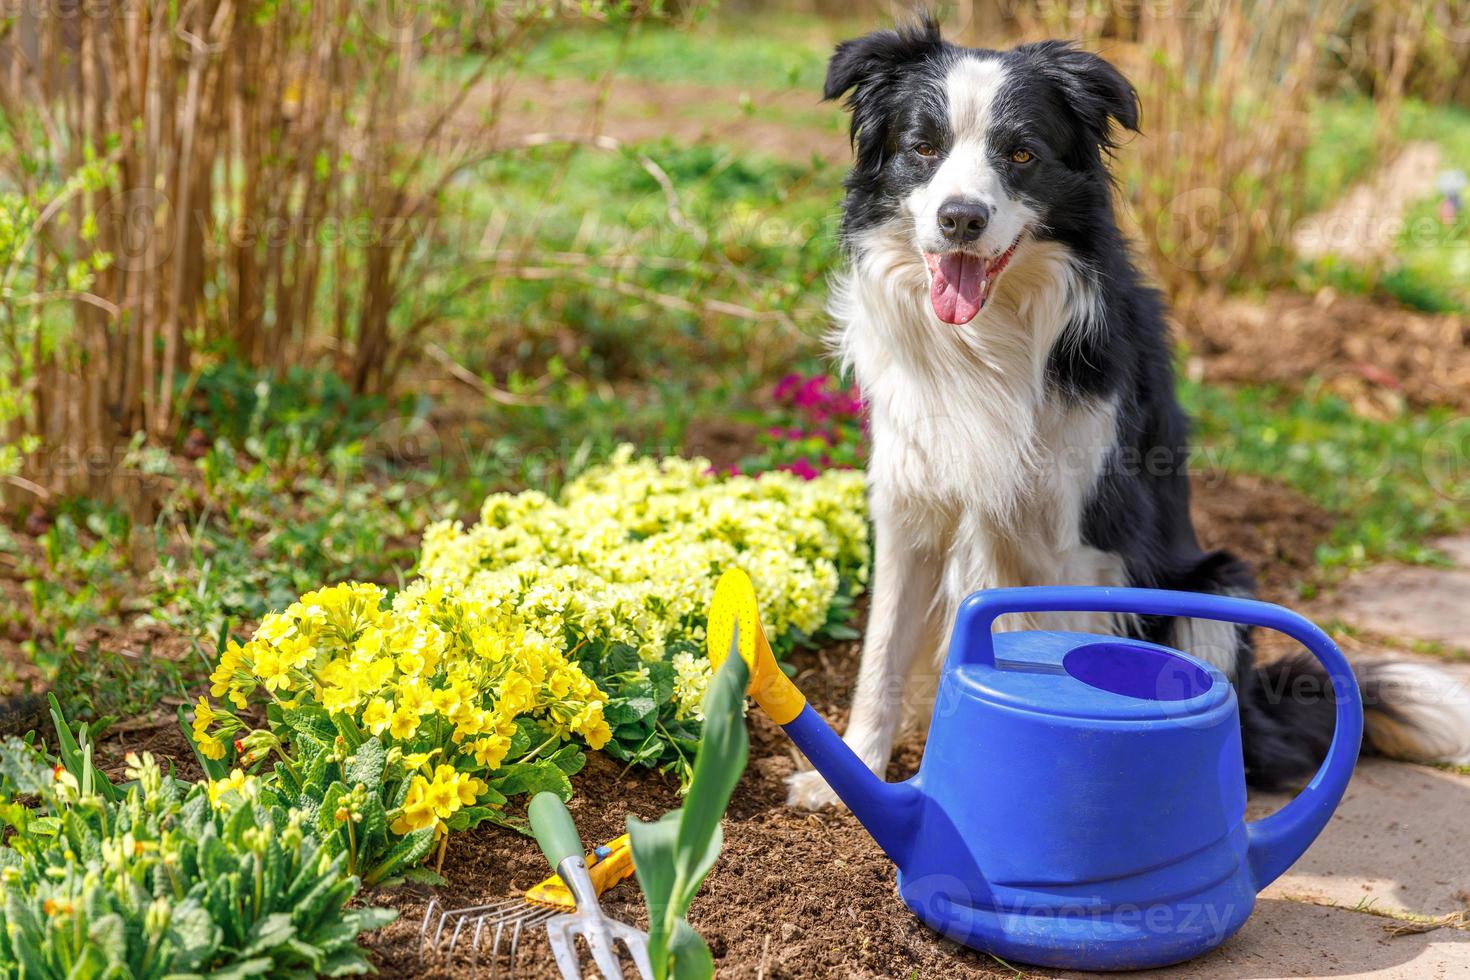 Outdoor portrait of cute dog border collie with watering can in garden background. Funny puppy dog as gardener fetching watering can for irrigation. Gardening and agriculture concept. photo